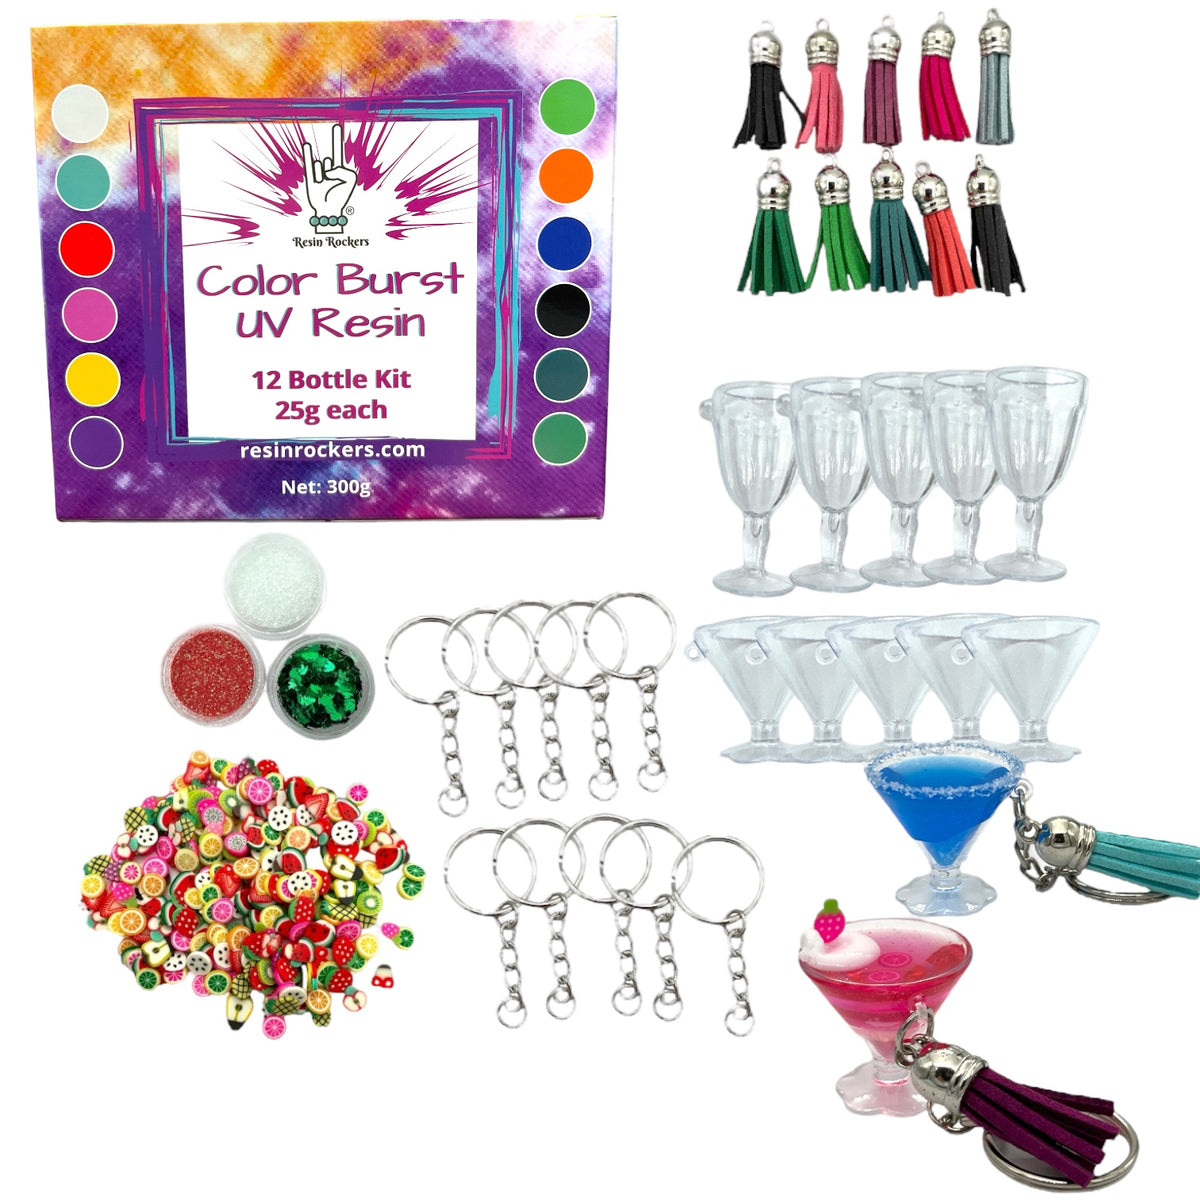 Cocktail Creations Keychain Crafting Kit With Color Burst UV Resin